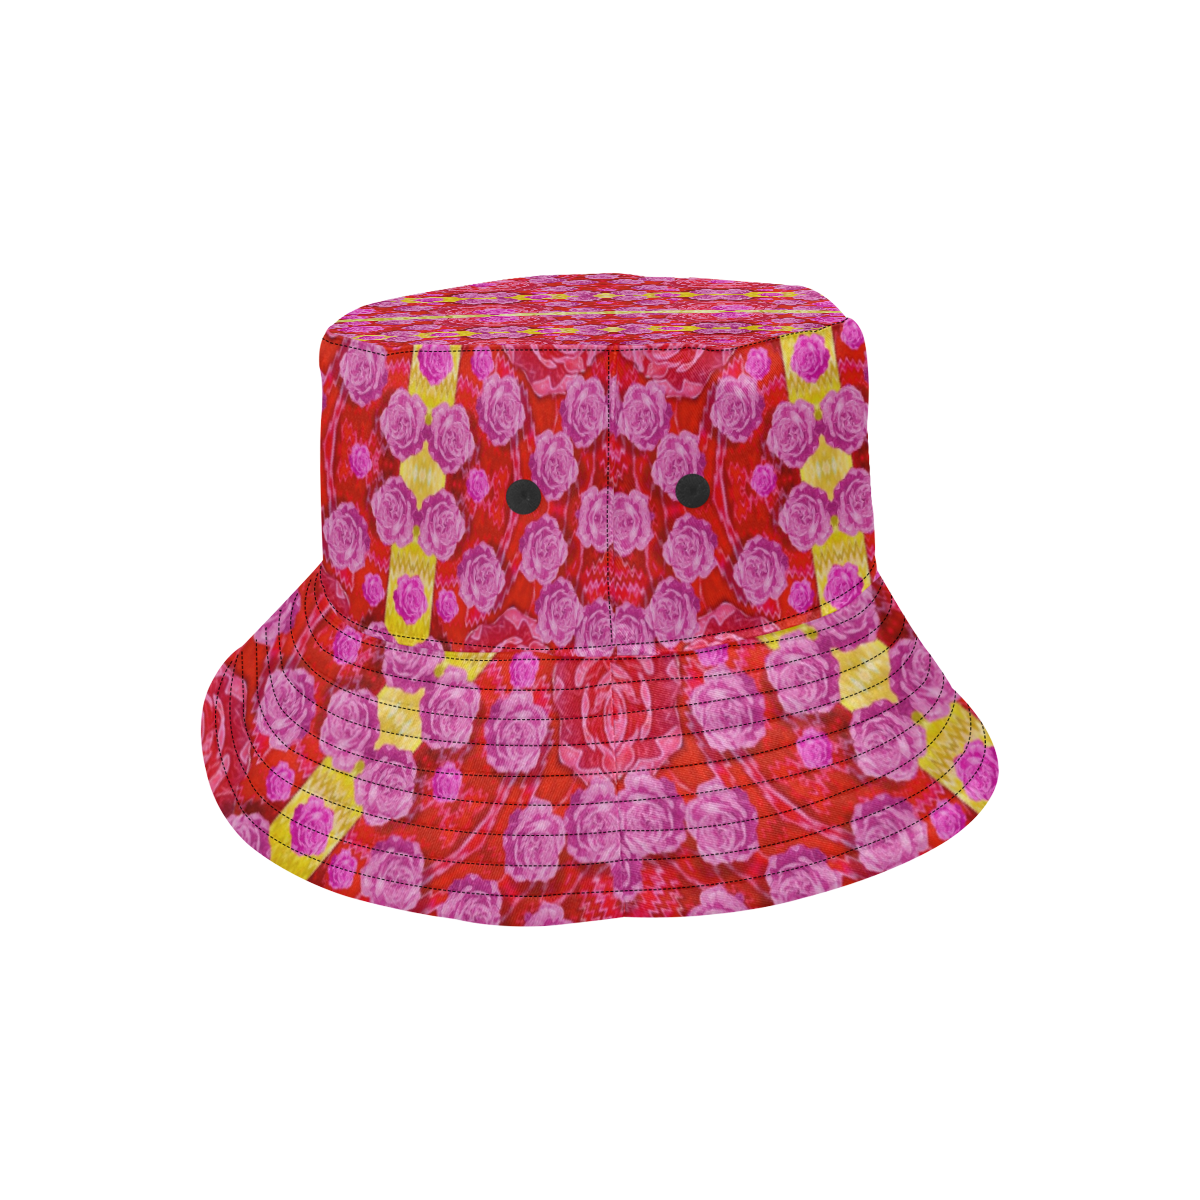 Roses and butterflies on ribbons as a gift of love All Over Print Bucket Hat